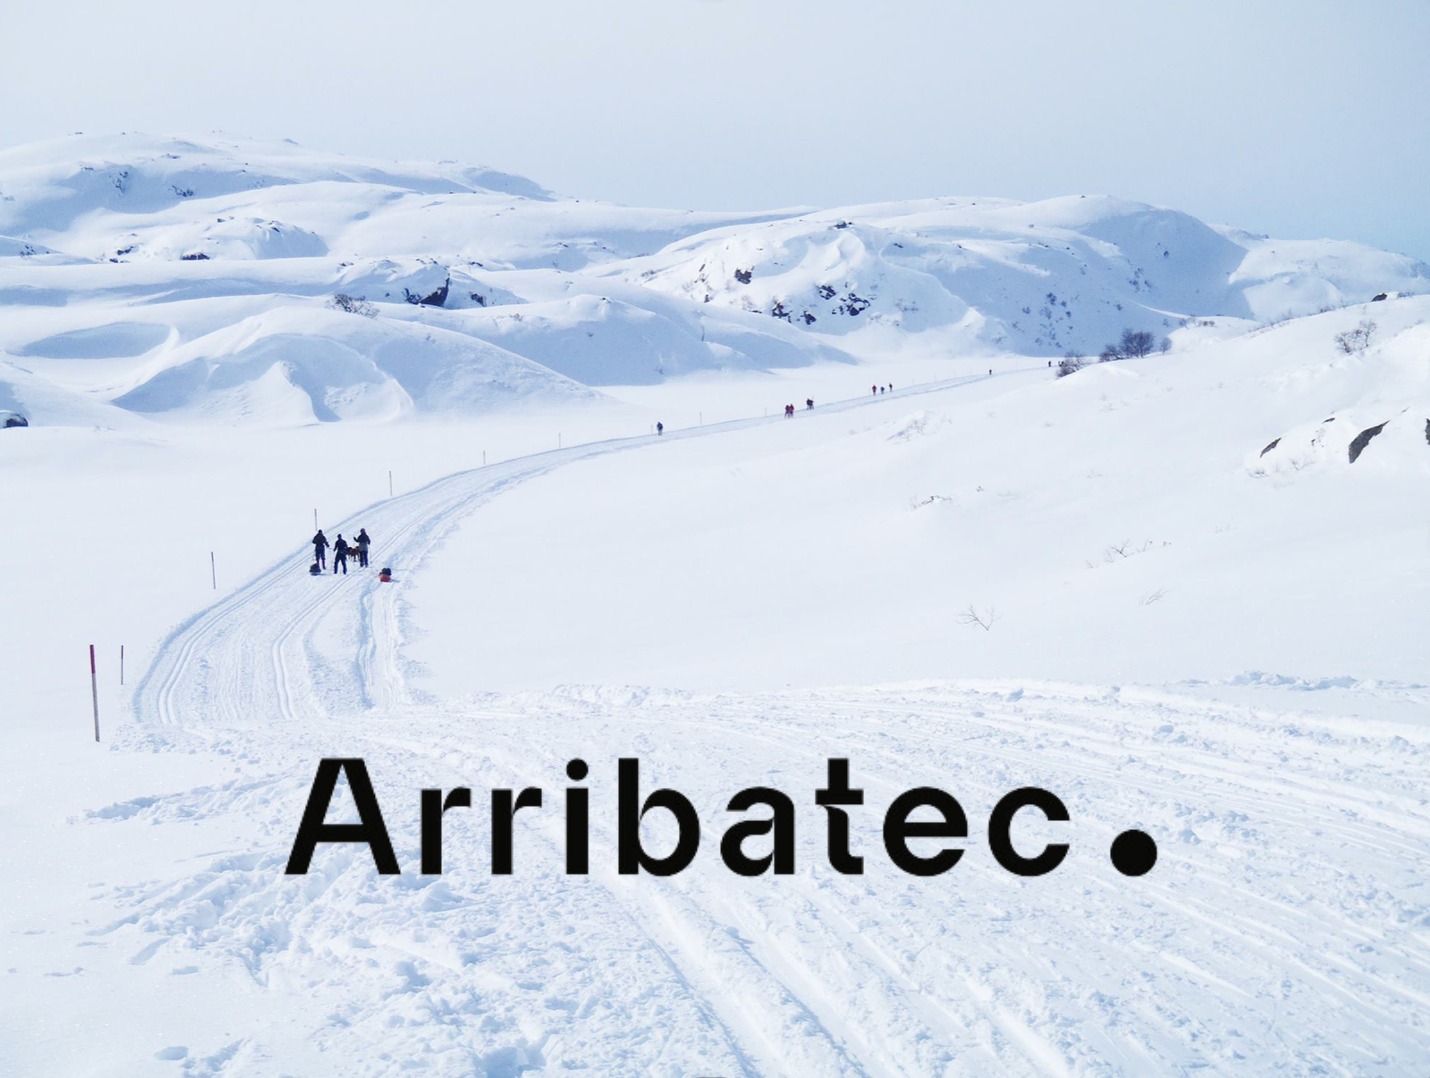  Arribatec is proud to be one of the sponsors of Sirdalsløyper, a non-profit organisation that maintains and prepares over 120 kilometres of cross-country ski trails in Sirdal.